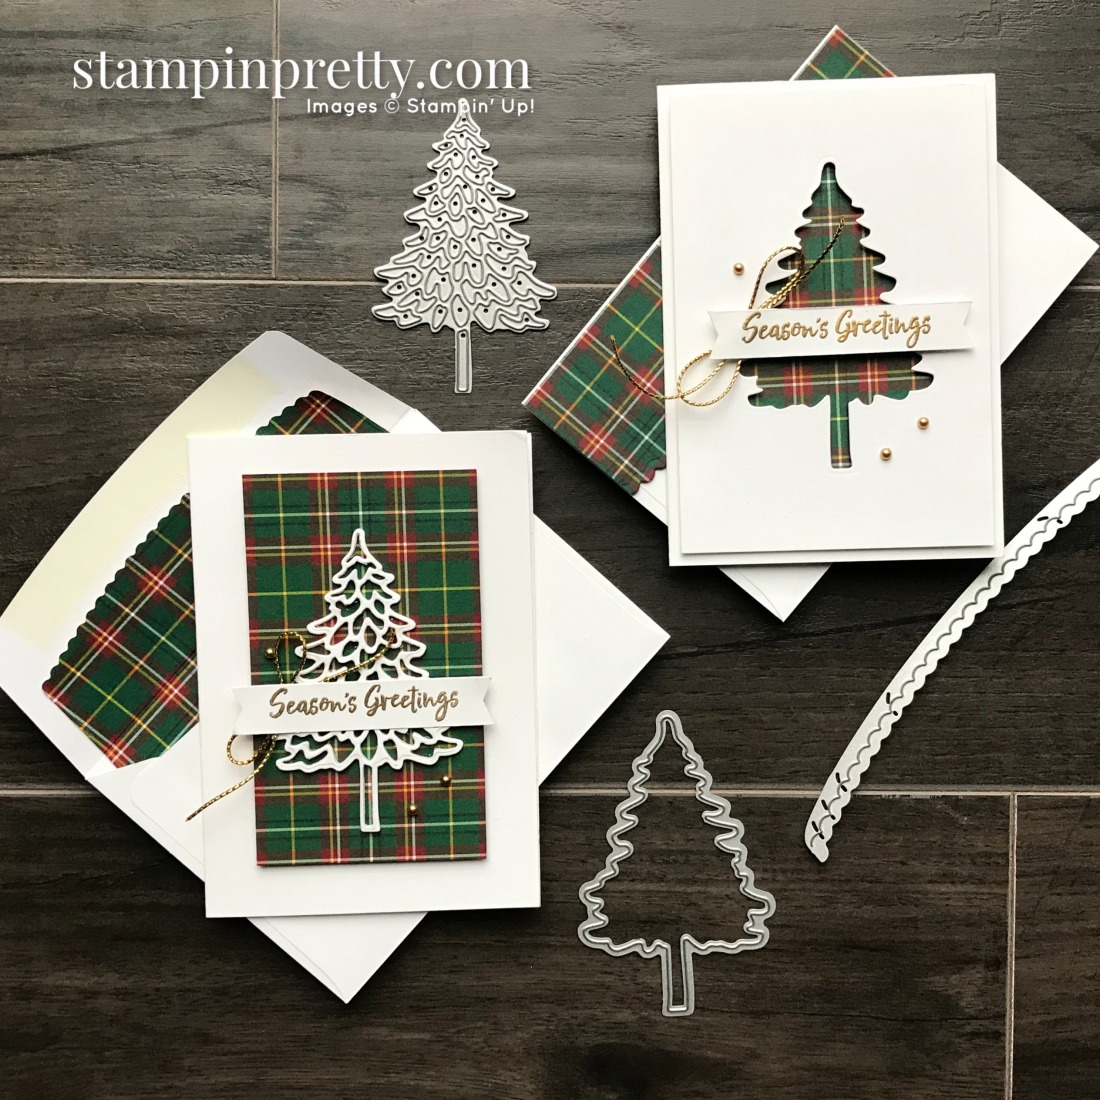 Create these Note Cards using the Plaid Tidings DSP and In the Pines Bundle from Stampin' Up! Created by Mary Fish, Stampin' Pretty_Crop